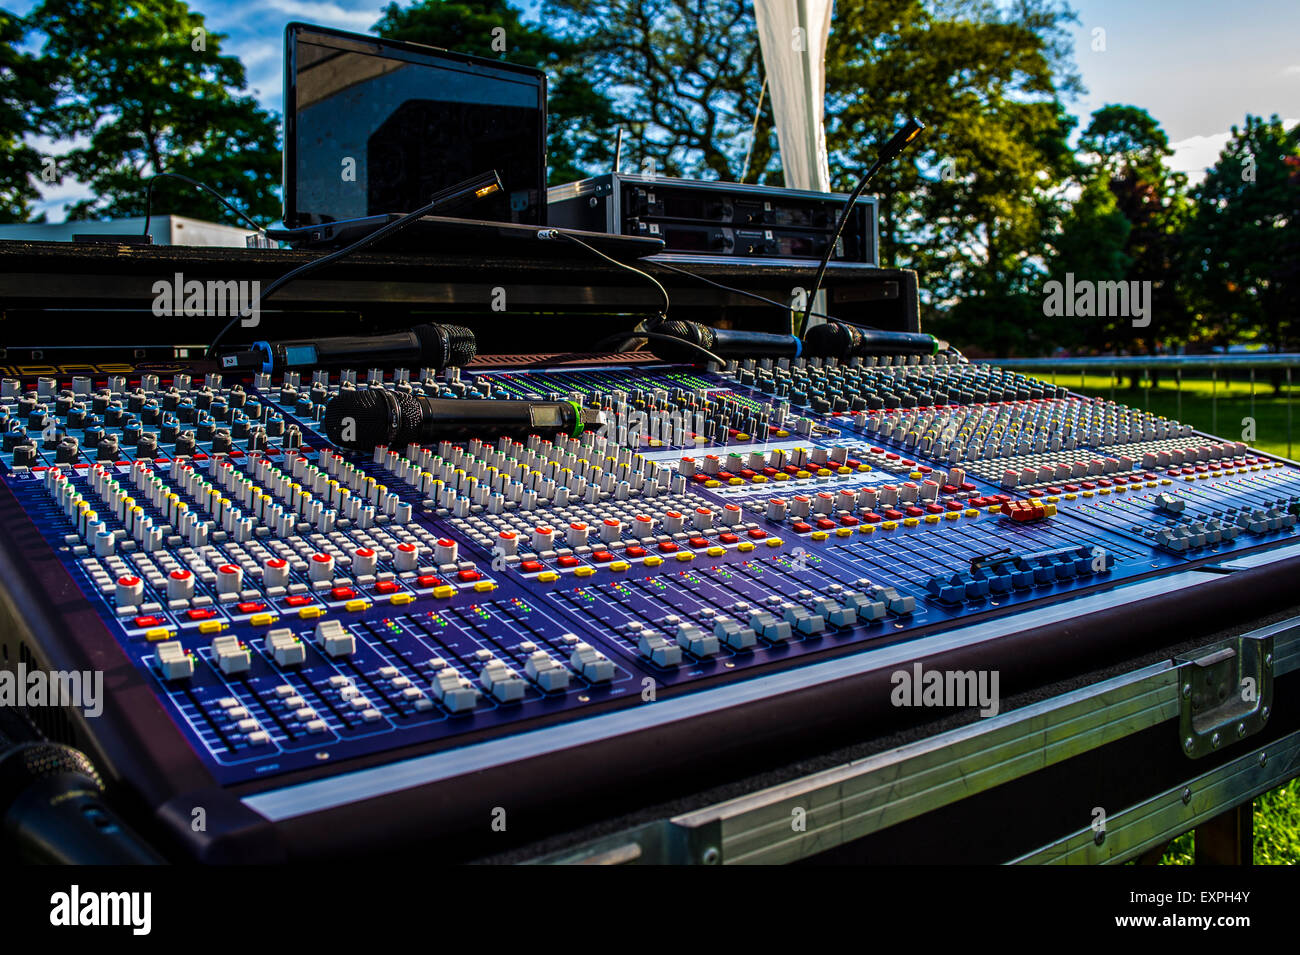 Mixing Desk Outdoor Concert With Radio Microphones And Laptop